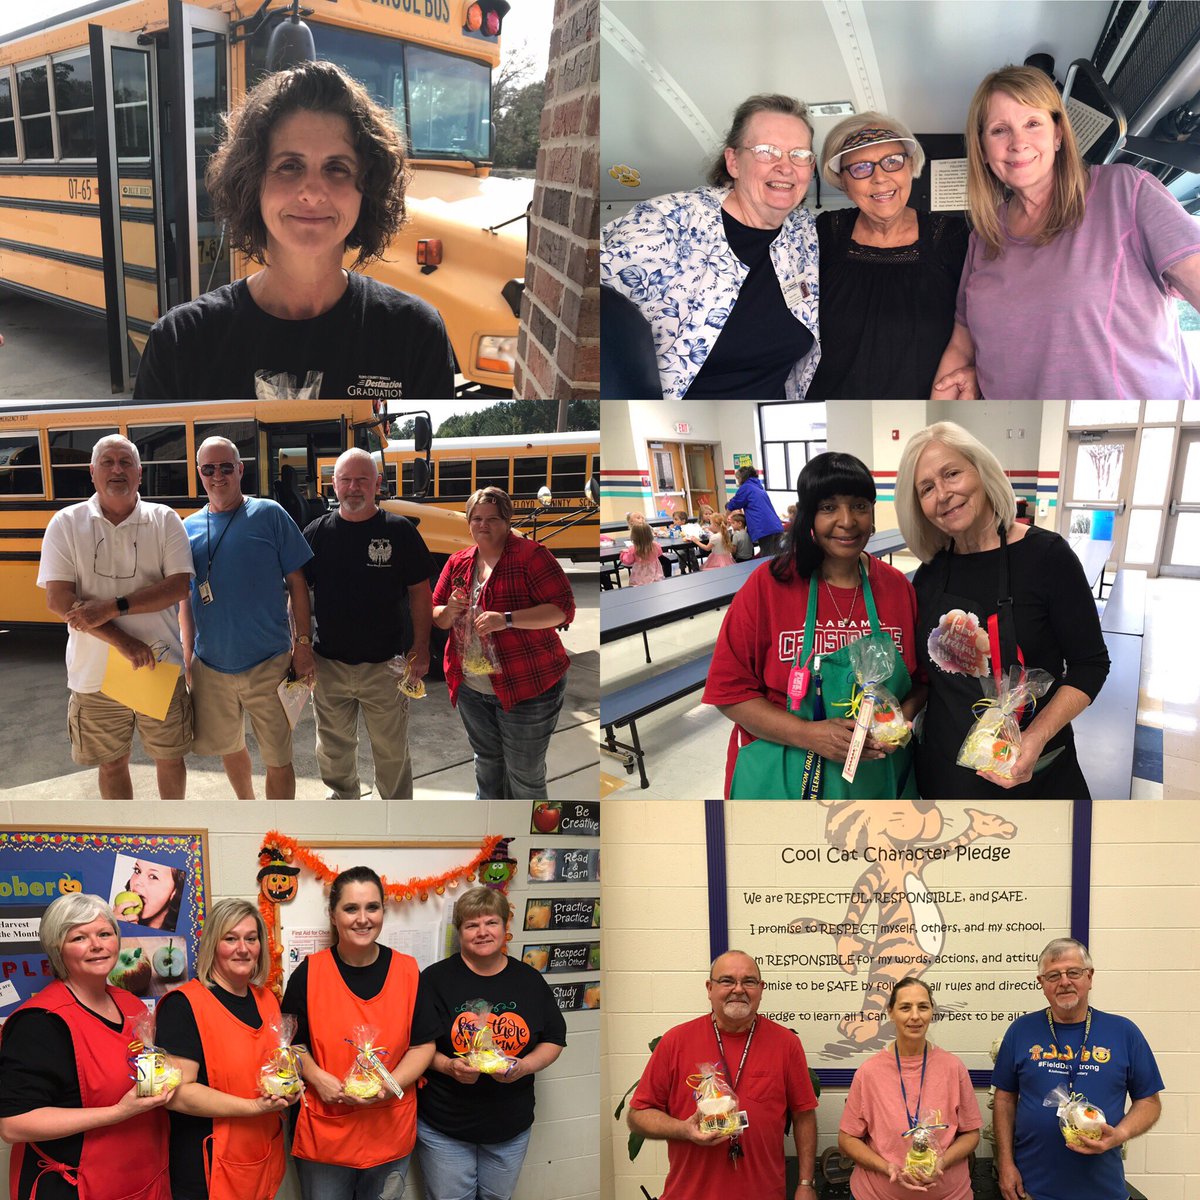 We are so thankful for the people who bring our students to school, keep JES fresh and clean, and prepare delicious meals every day for our students! Many thanks to these terrific JES Wildcats! #nationalschoolbusdriverday #nationalschoolcustodianday #nationalschoolnutritionday